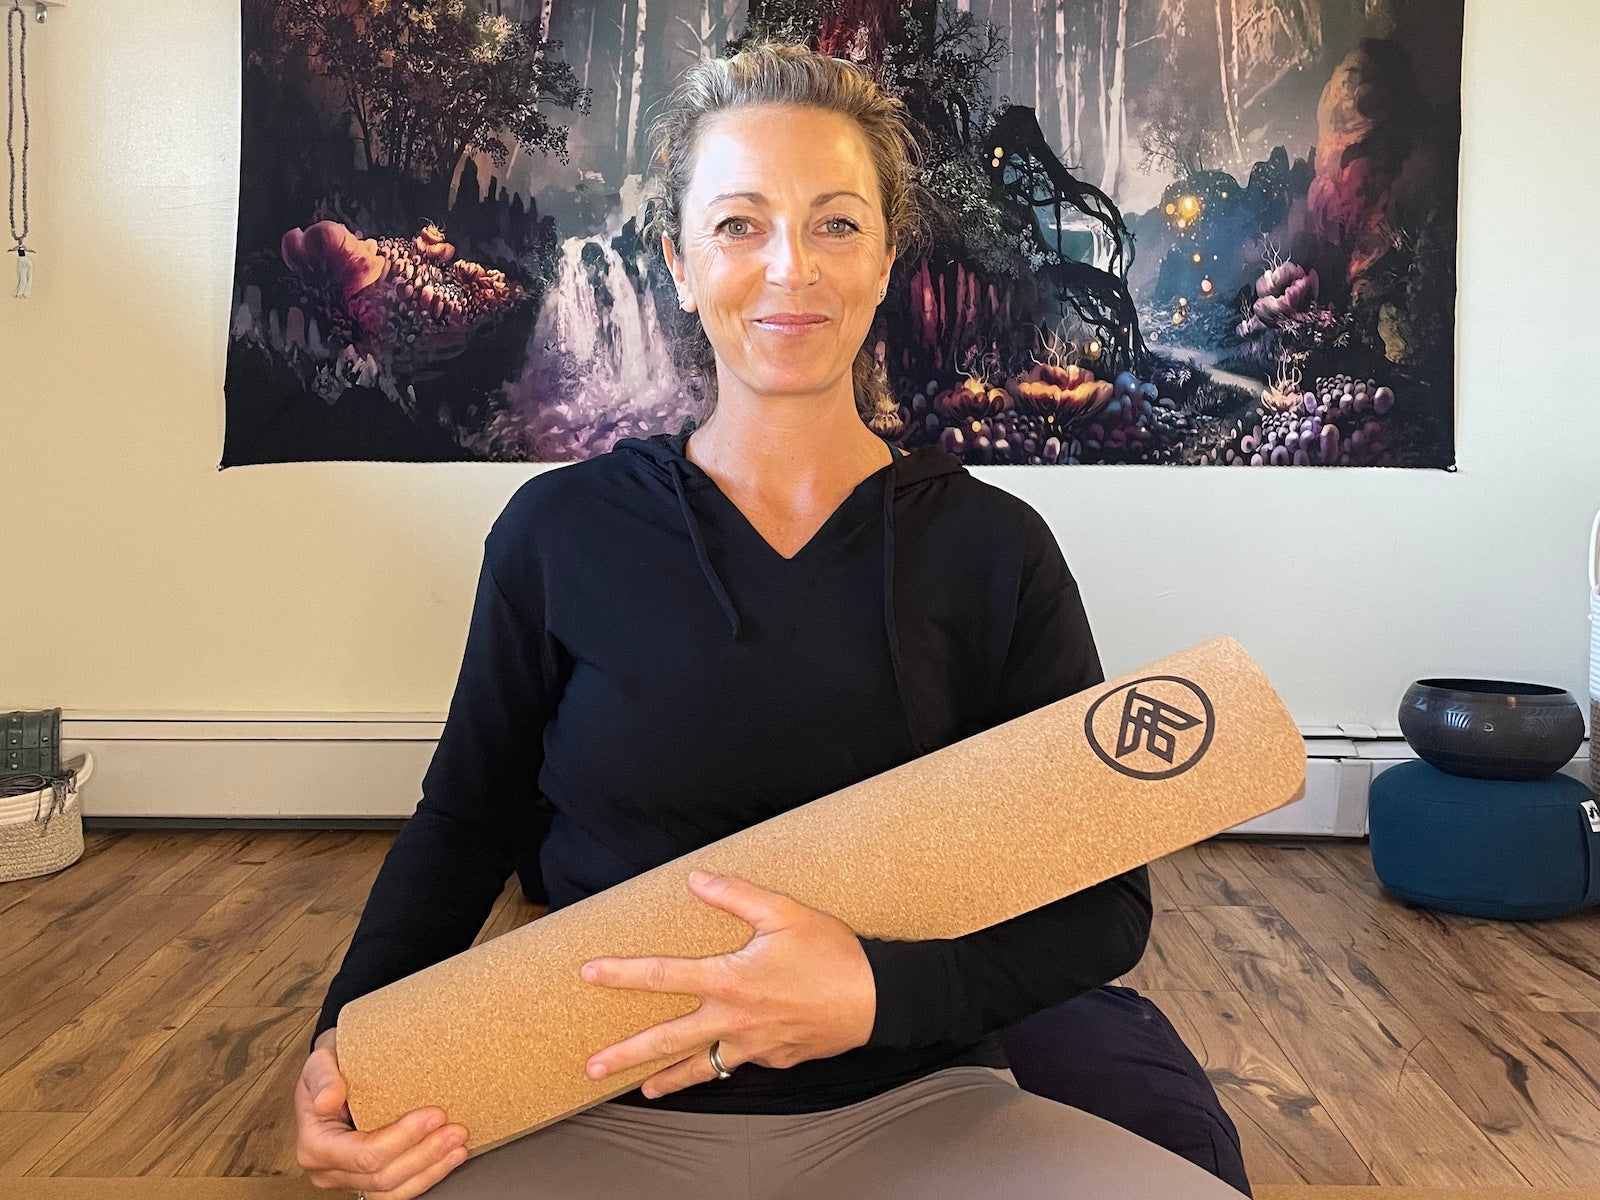 Load video: Niki shares her experience with the Flux cork yoga mat by Asivana Yoga